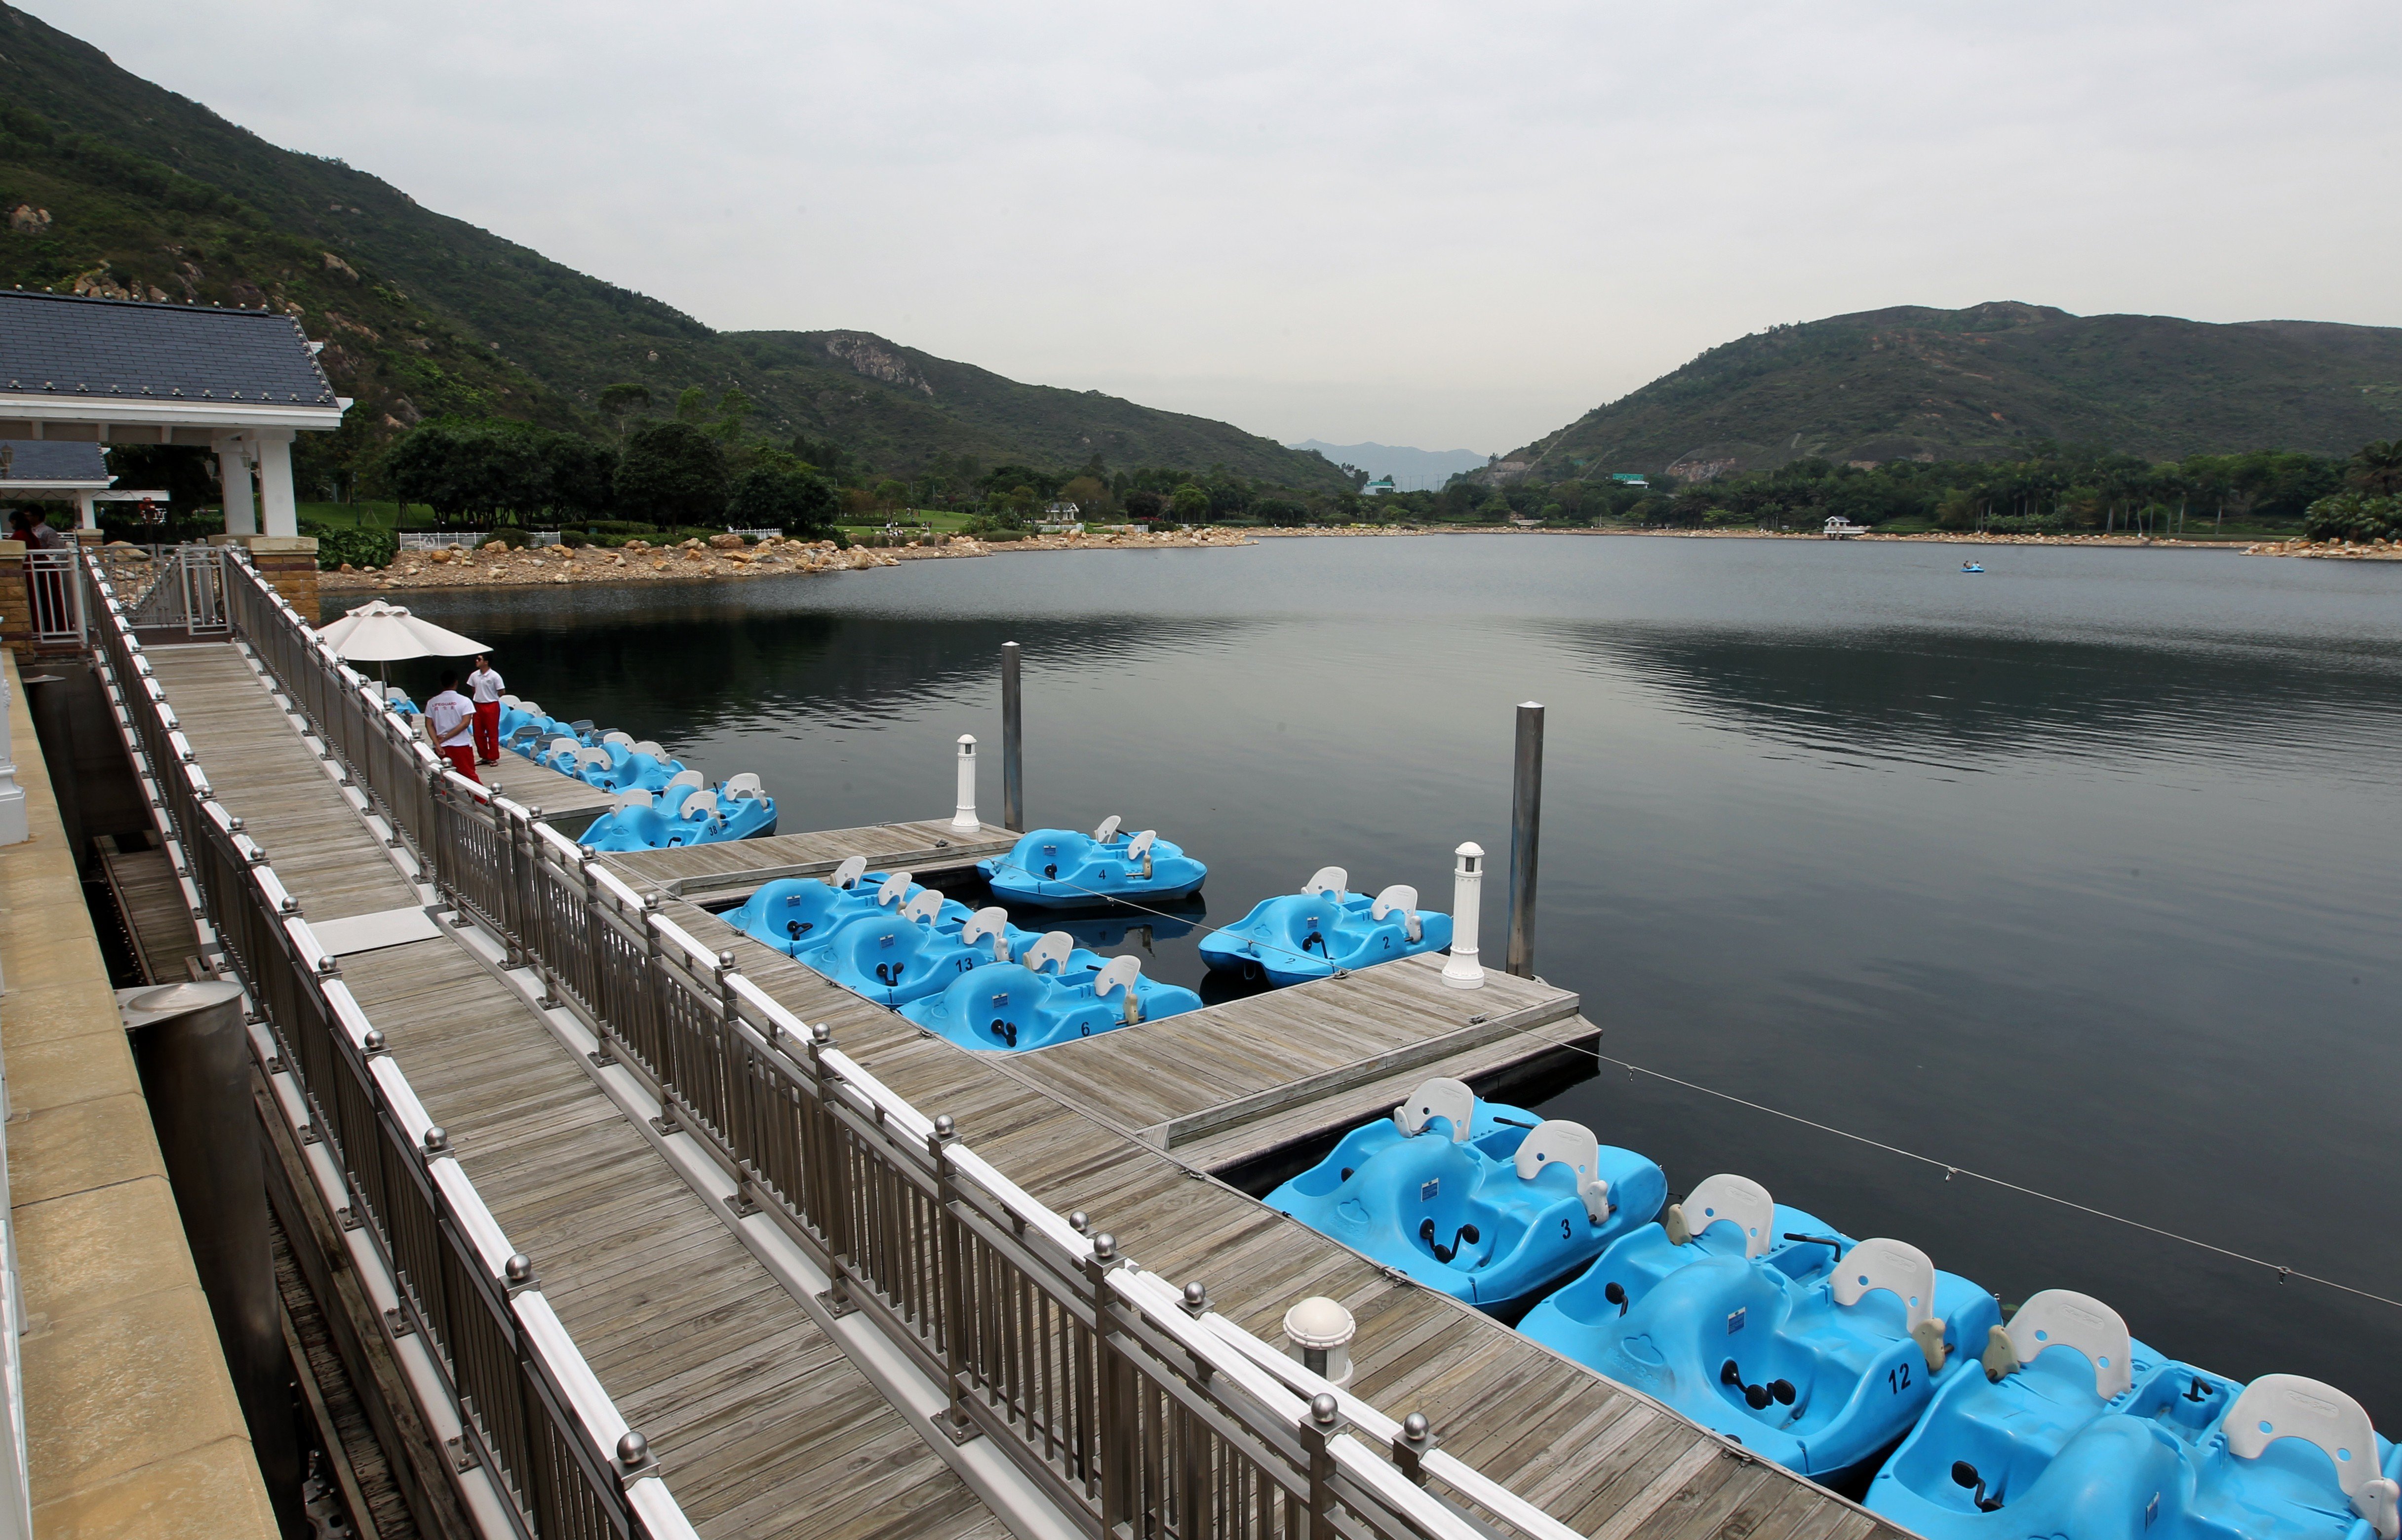 The “Inspiration Lake” recreation centre at Hong Kong Disneyland. In 2005, a Tung Chung rural leader and an accomplice were found guilty of stealing more than 800 tonnes of boulders from Tung Chung River, intending to sell them to the Disney project. Photo: May Tse